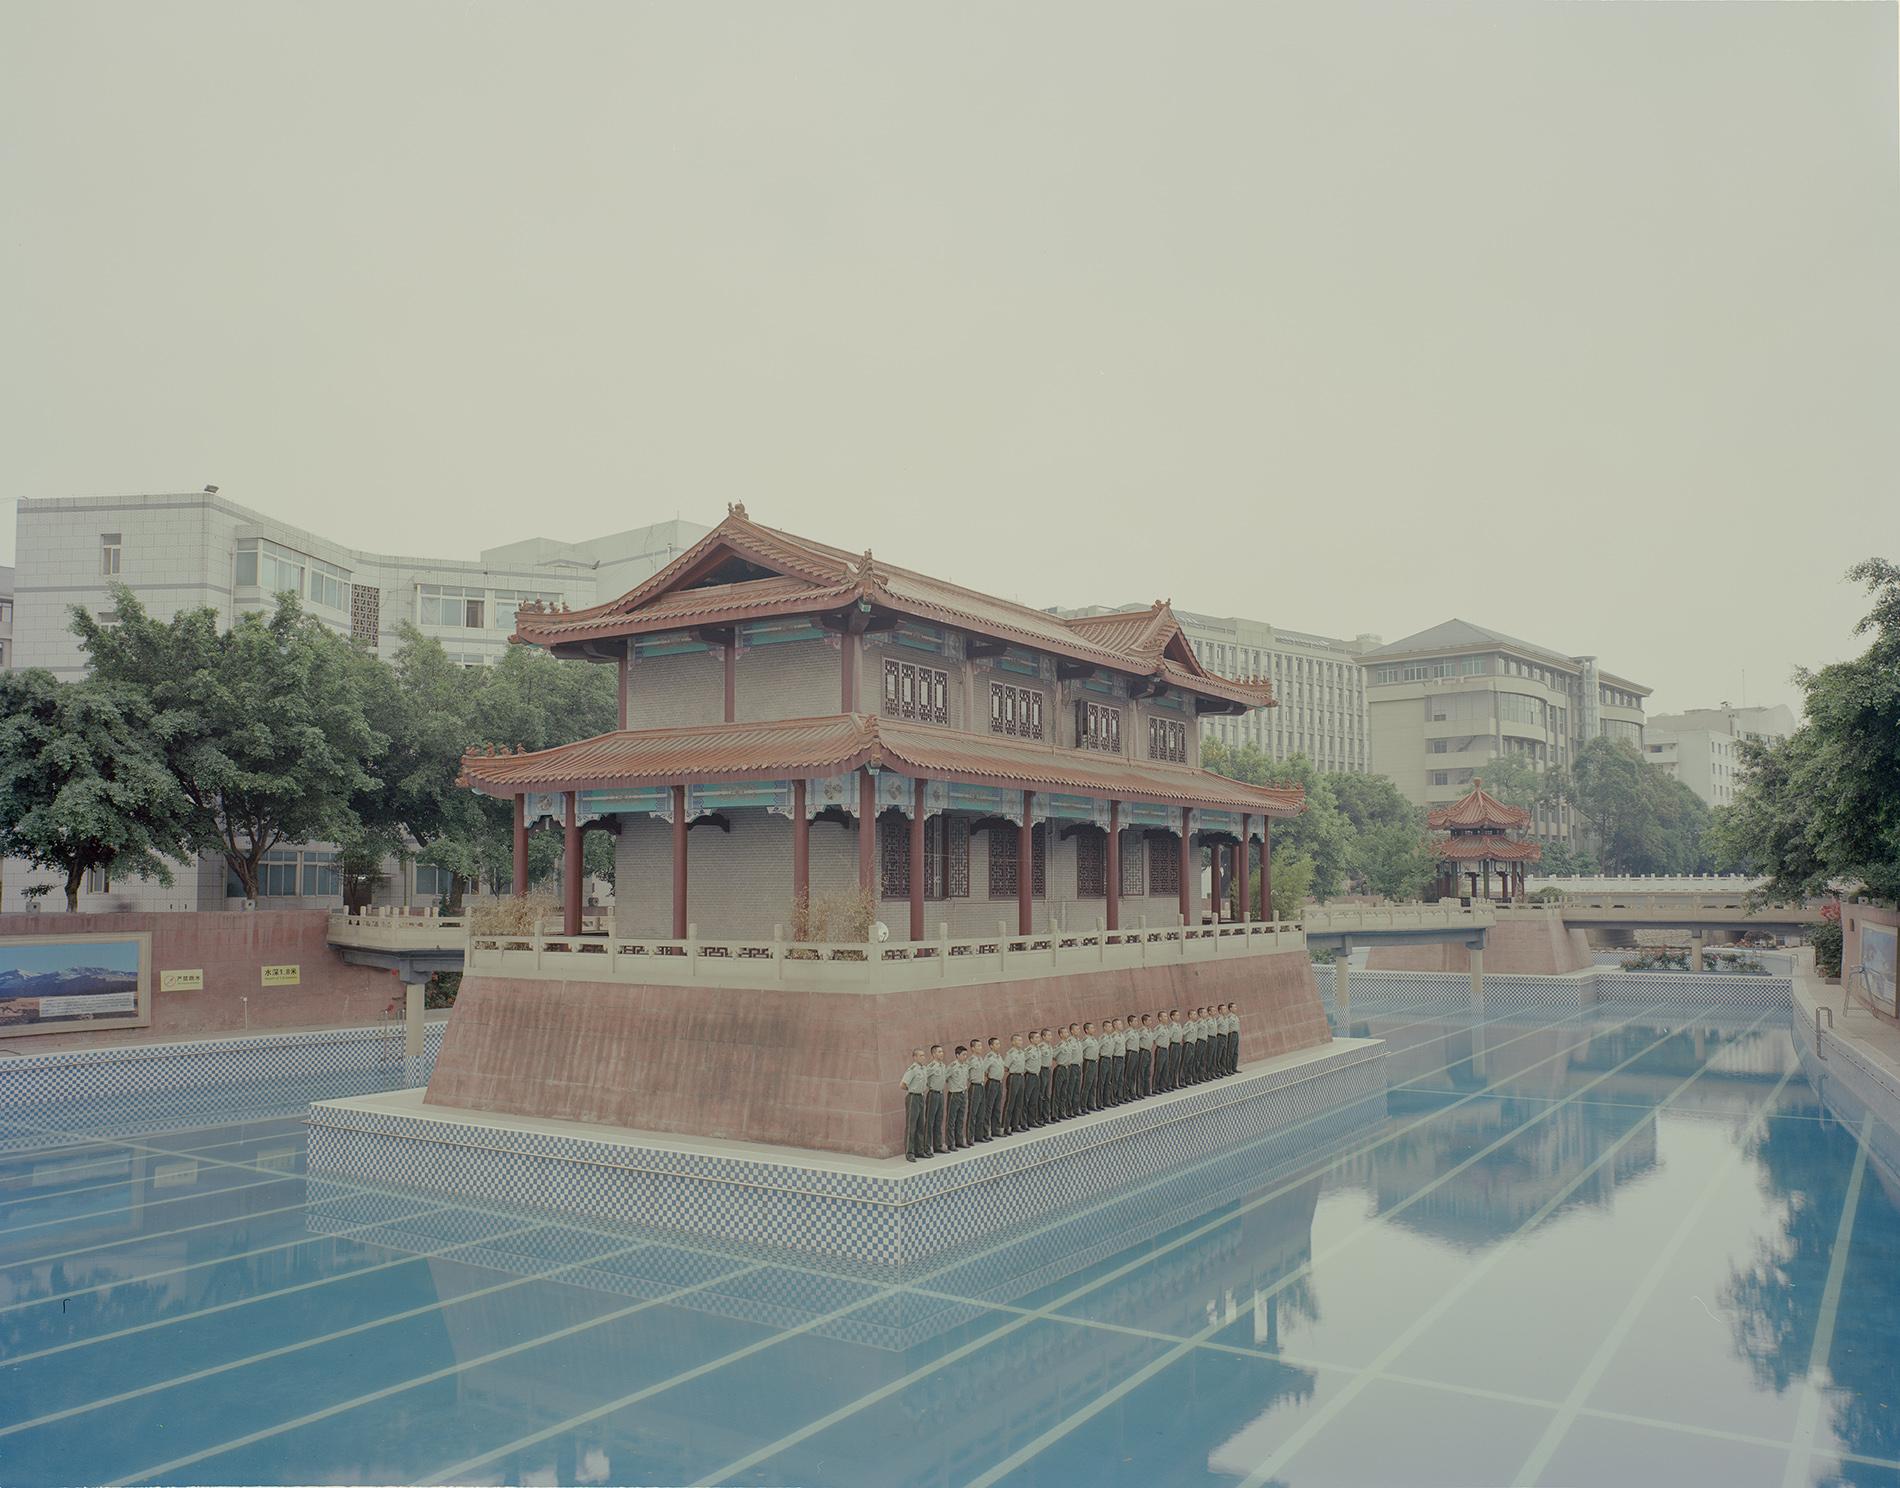 Zhang Kechun Color Photograph - The Soldiers Standing by the Pool - Contemporary Chinese Photography - Kechun